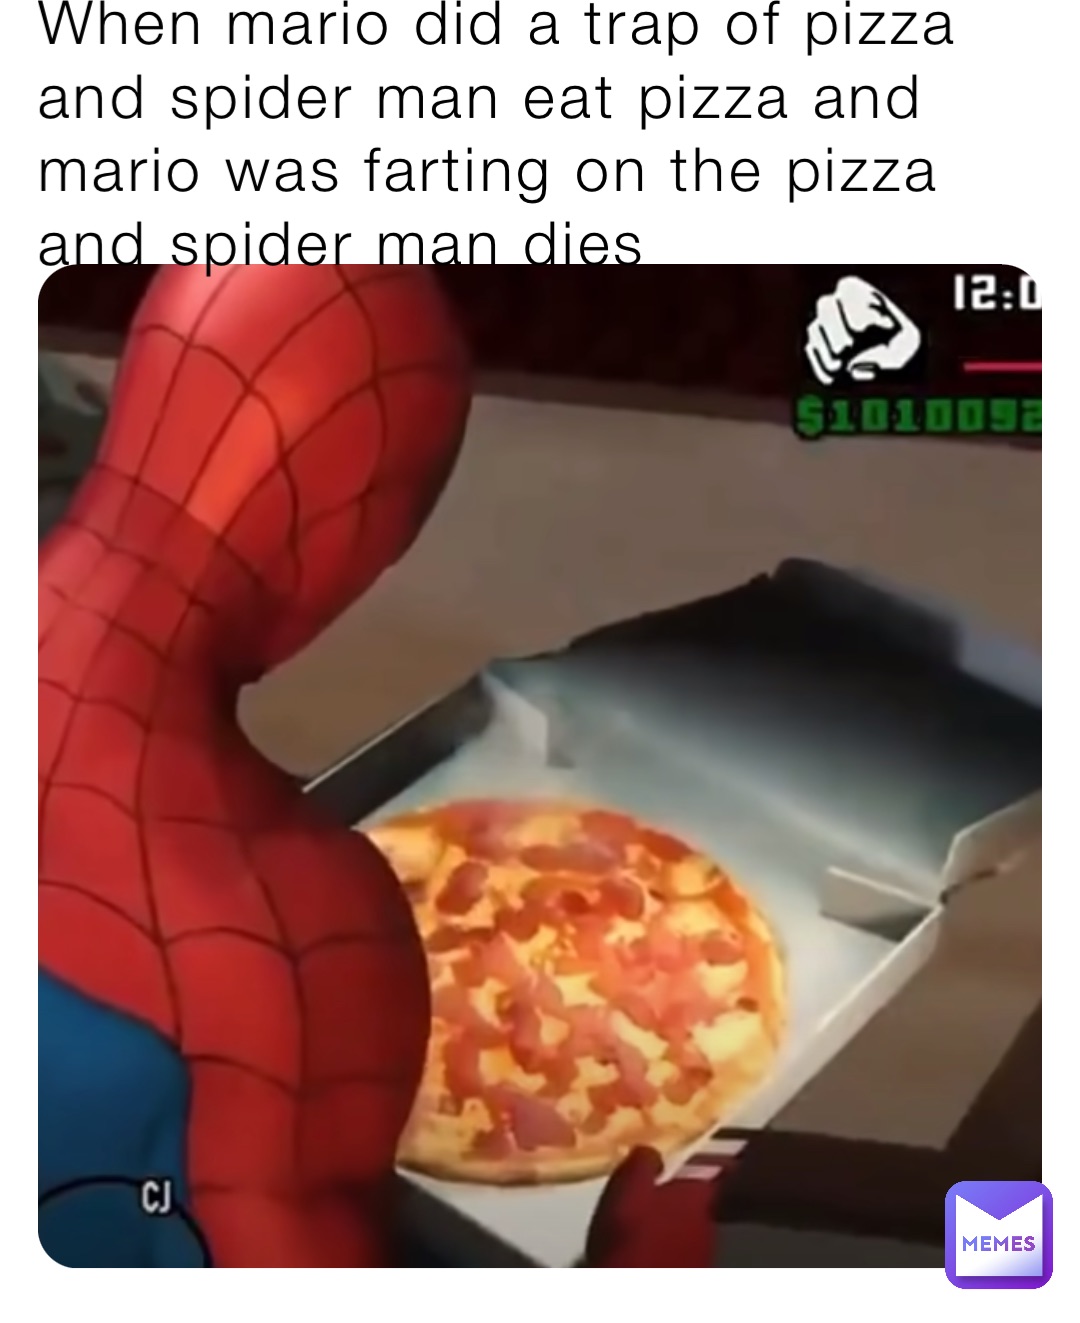 When mario did a trap of pizza and spider man eat pizza and mario was farting on the pizza and spider man dies